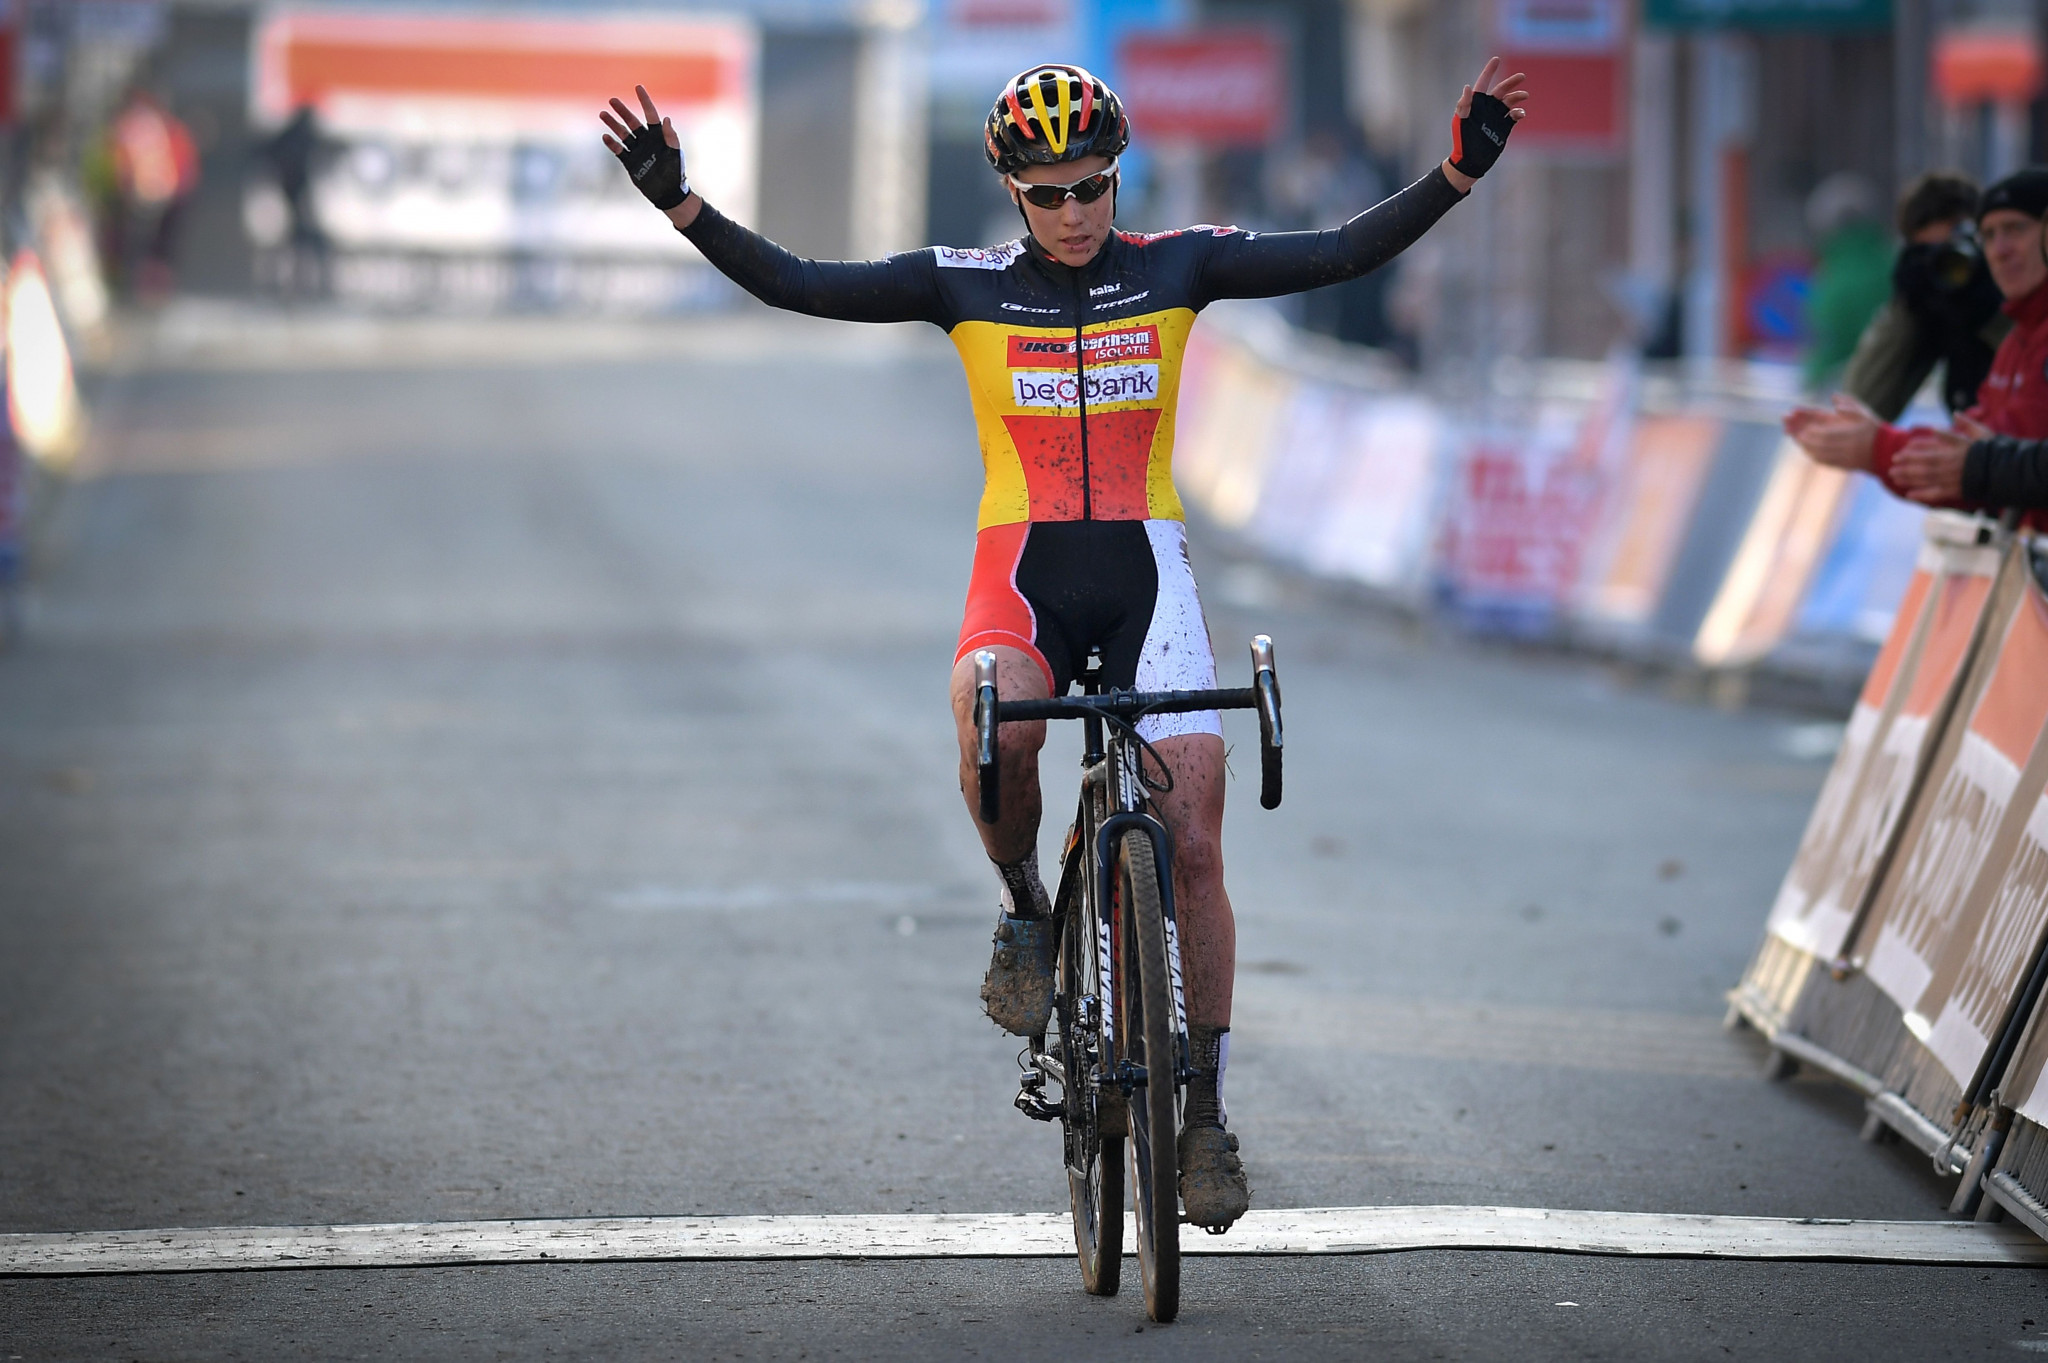 World champion Sanne Cant is expected to be among the favourites in the women's event ©Getty Images